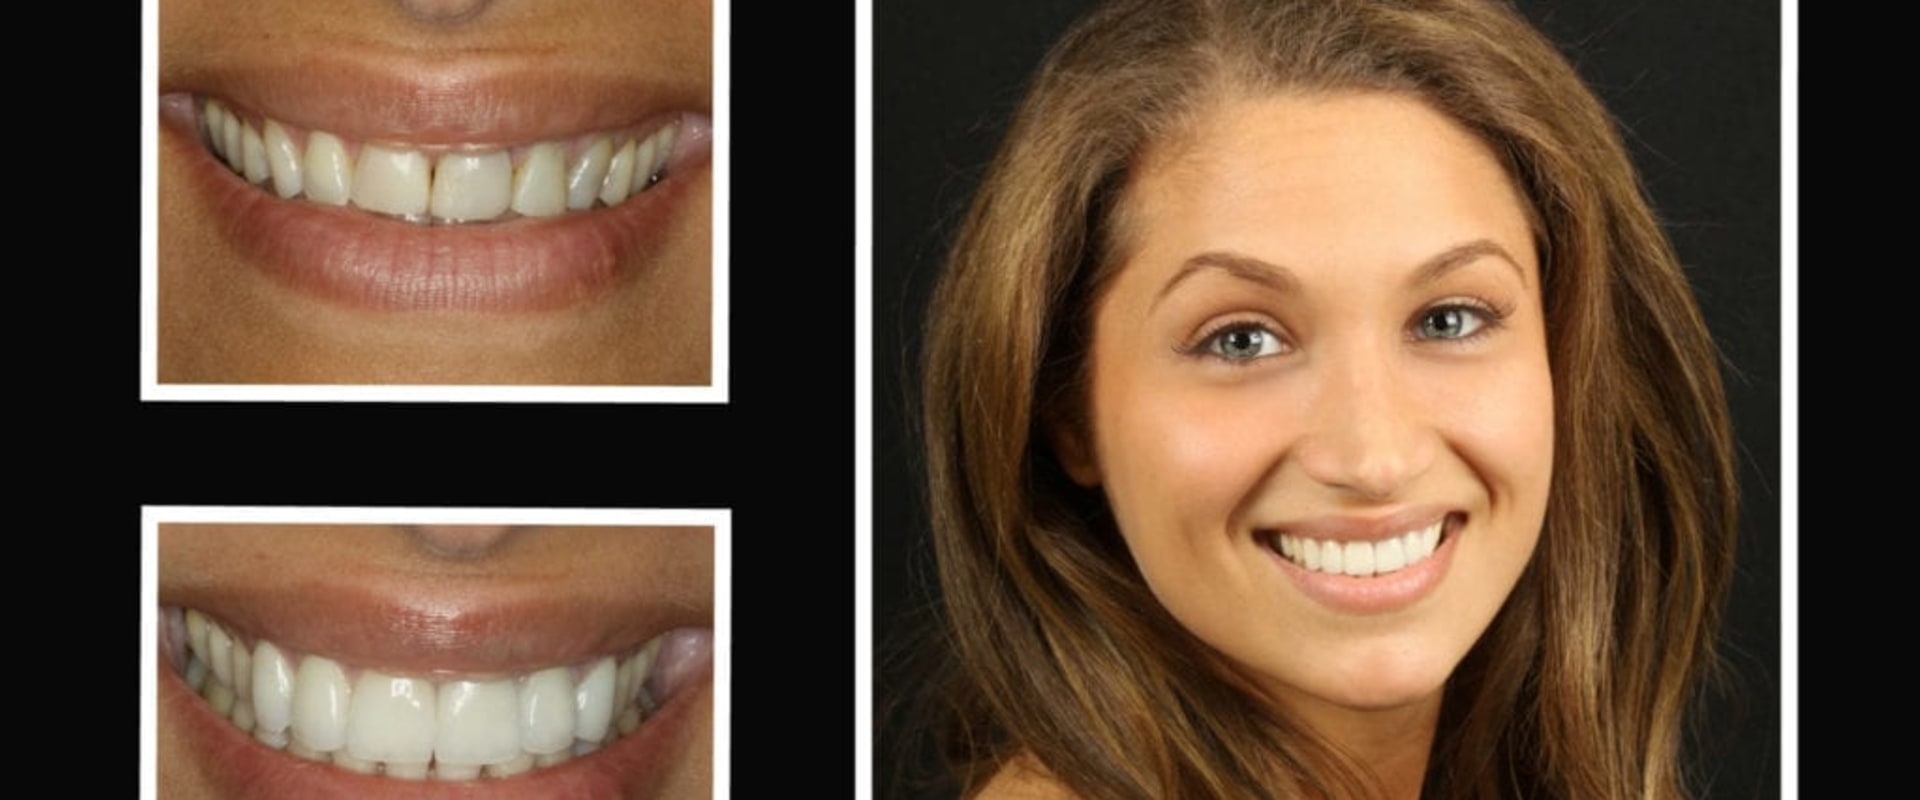 A Comprehensive Guide to Smile Makeovers